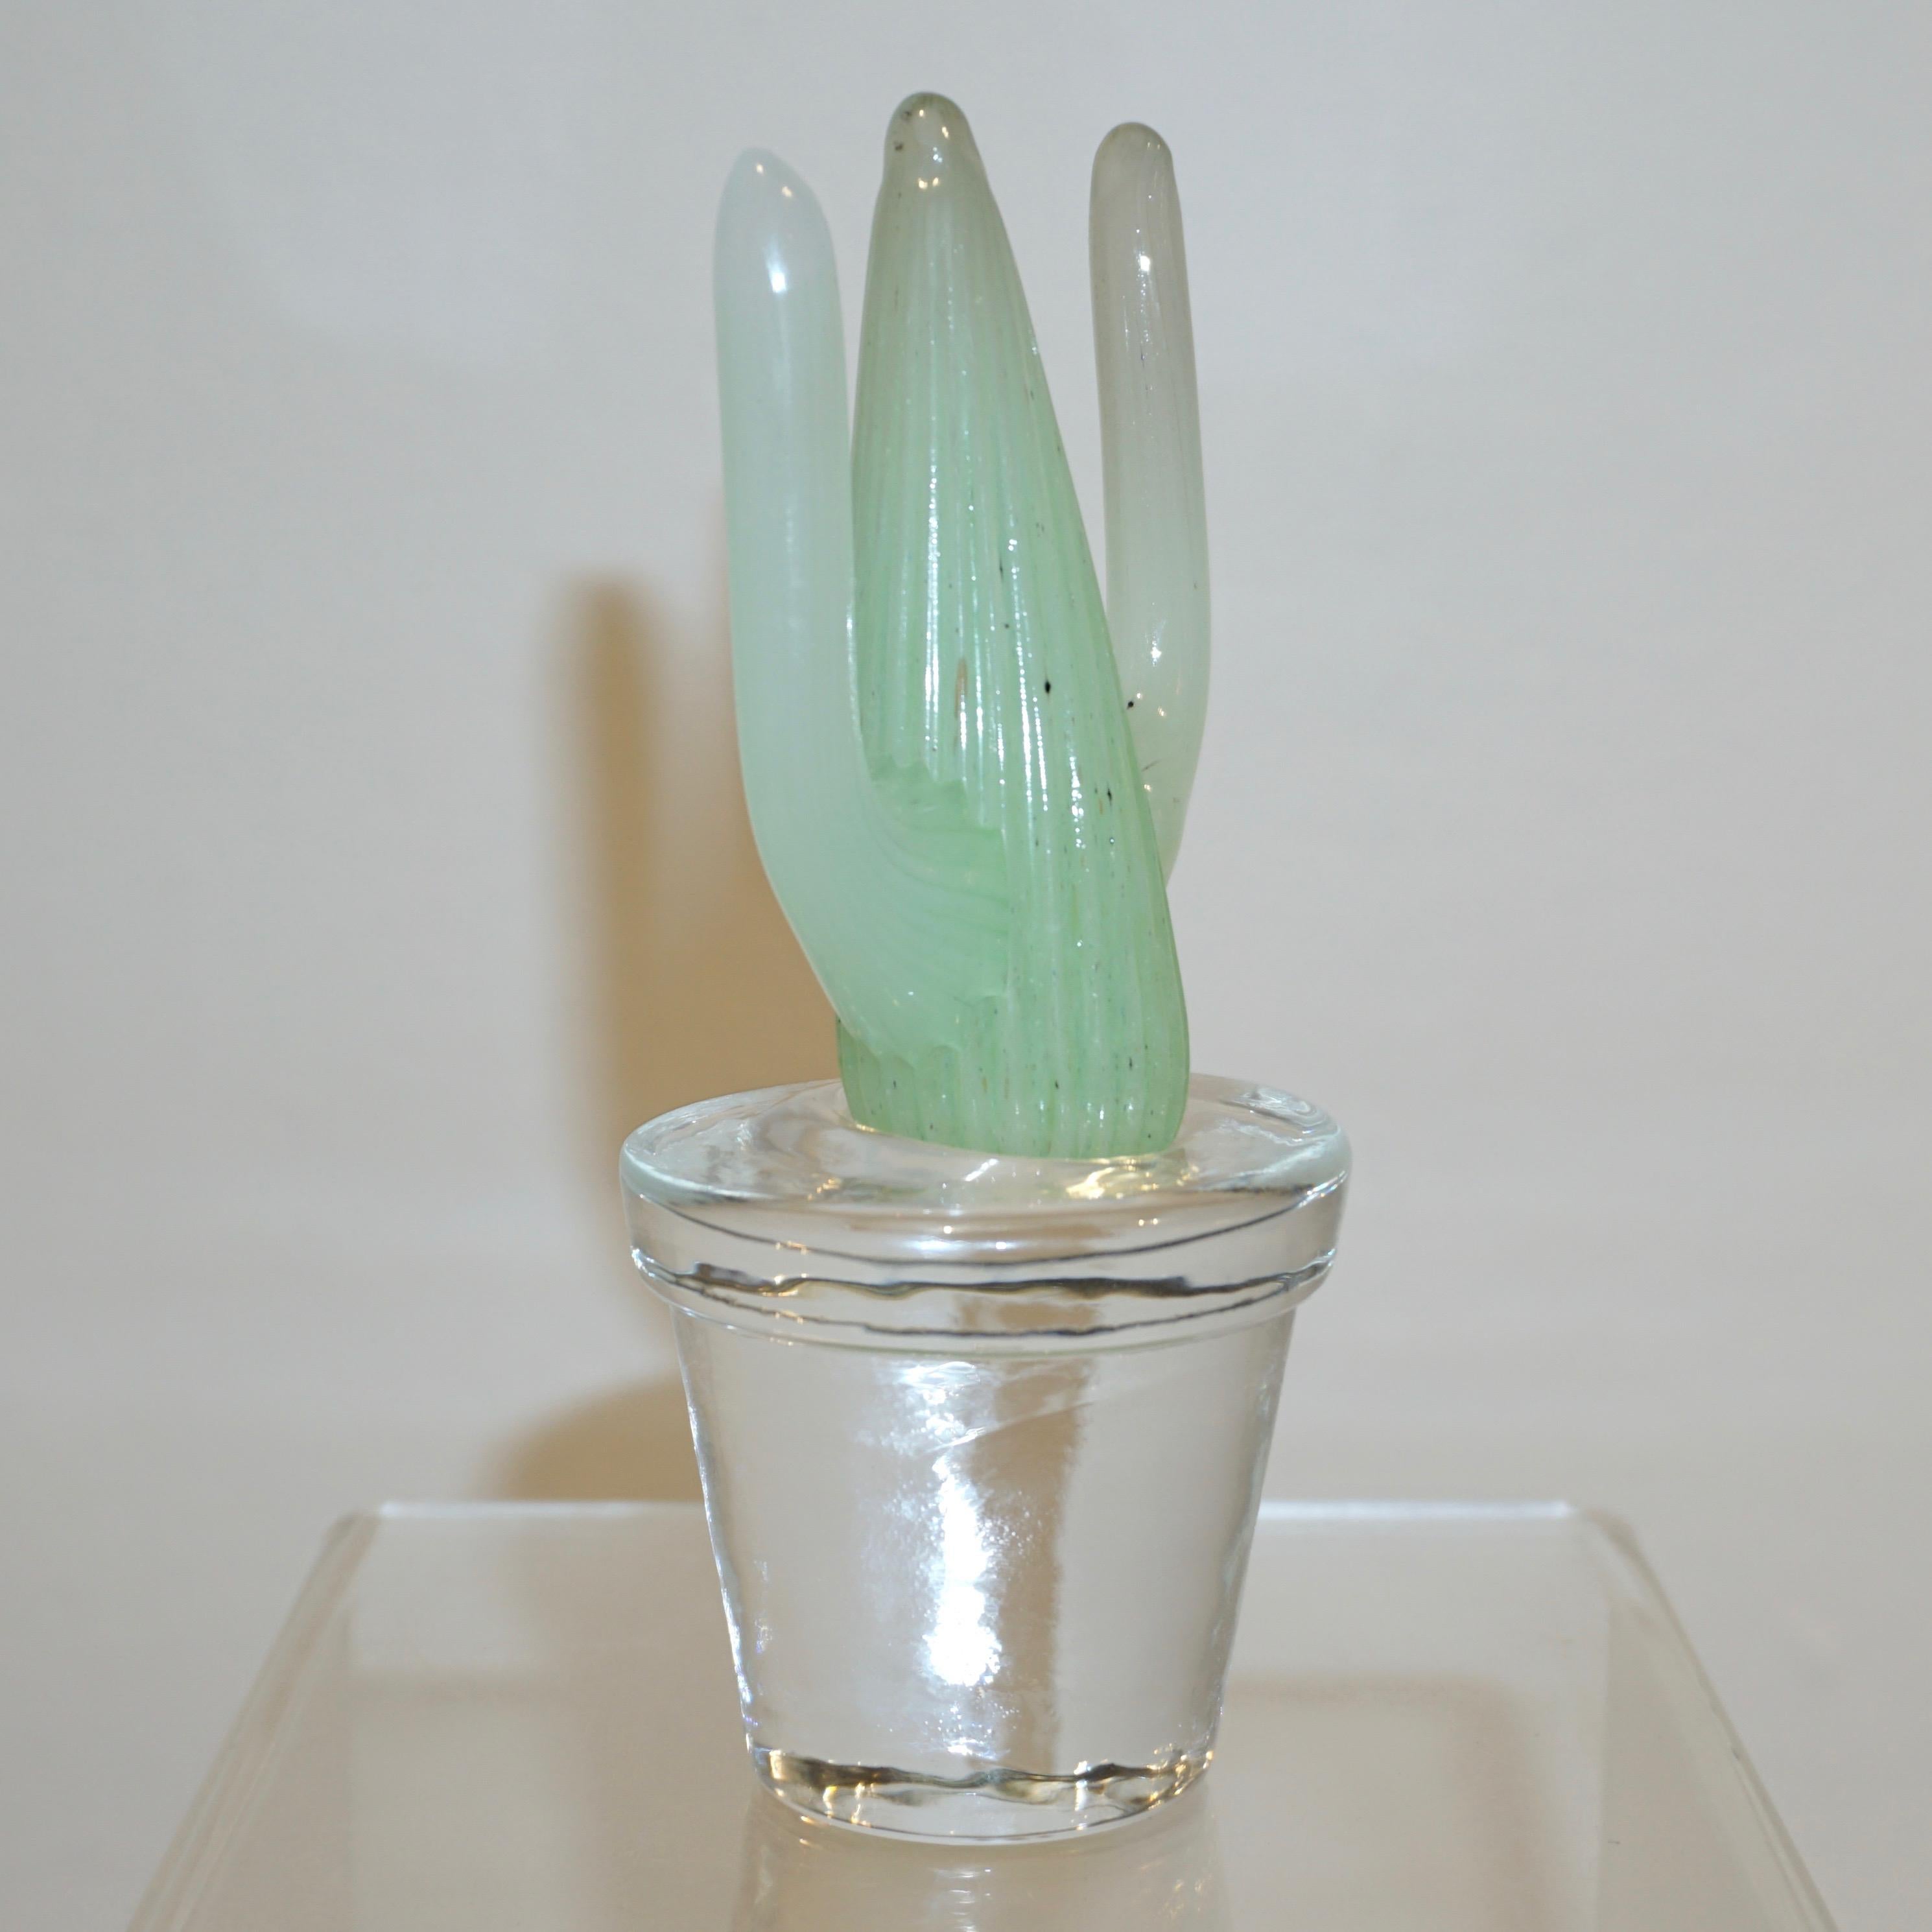 1990s Marta Marzotto Miniature Green Murano Glass Cactus Plants by Formia In Excellent Condition For Sale In New York, NY